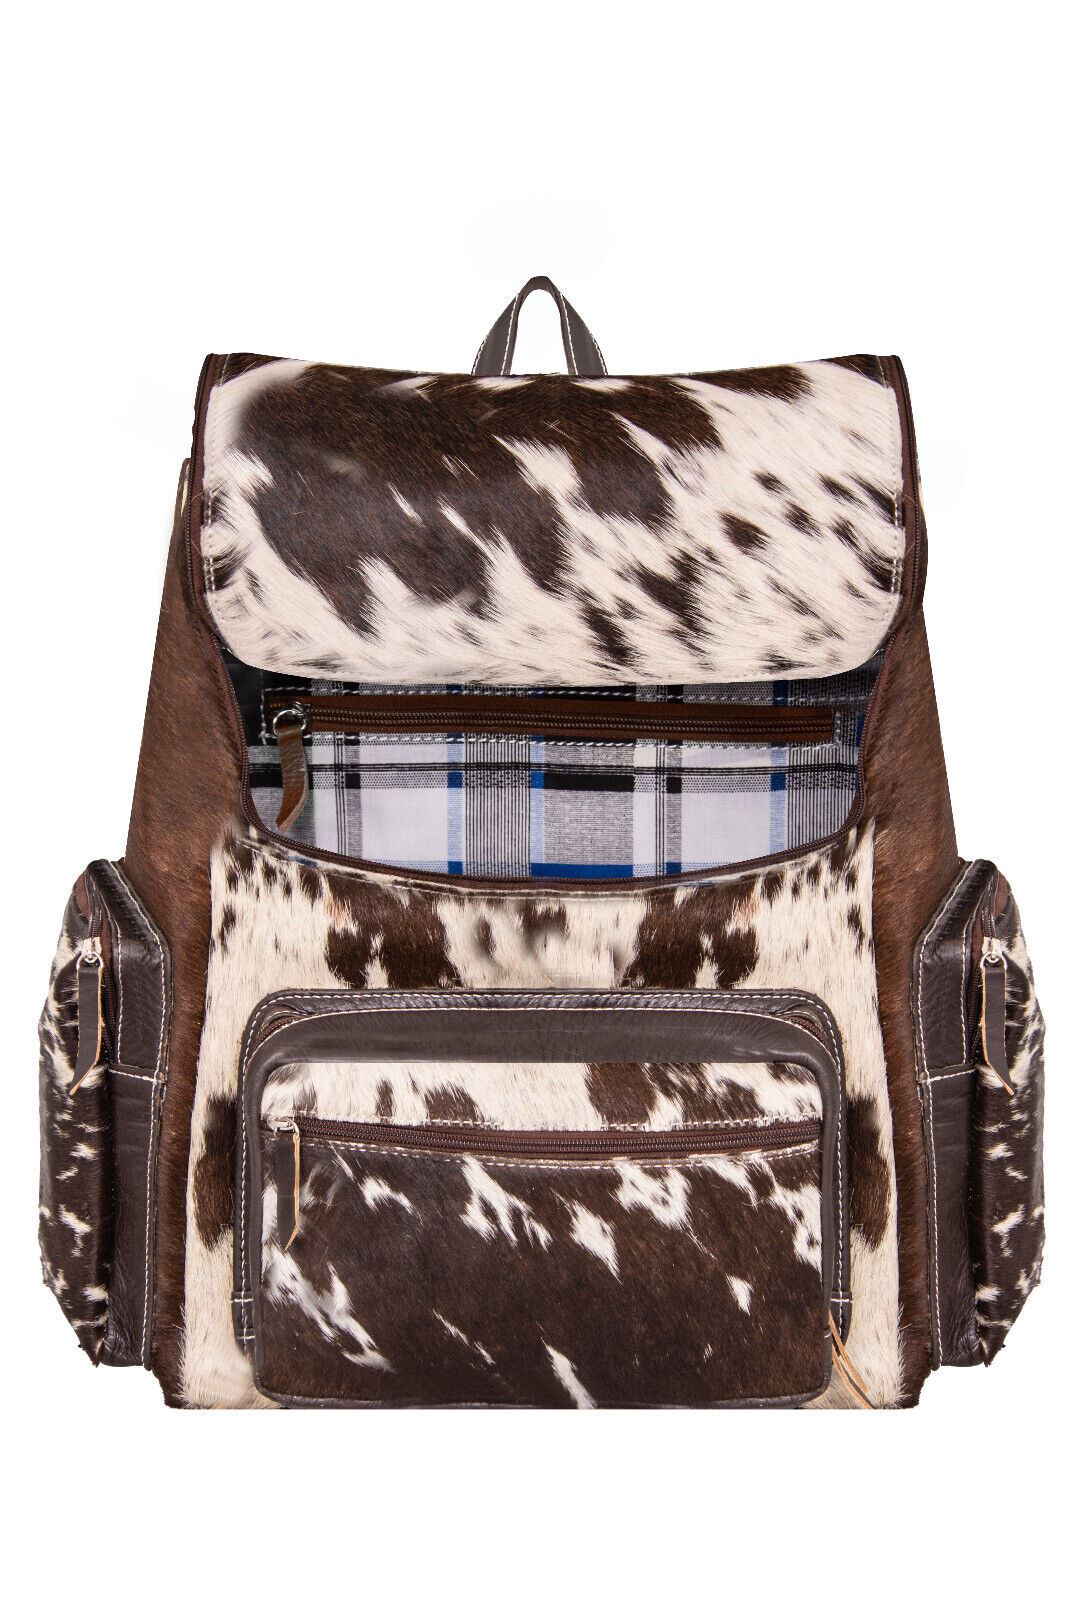 Deluxe Brown Leather Backpack Bag Genuine Cowhide &amp; Cow Fur Travel Rucksack - Upperclass Fashions 